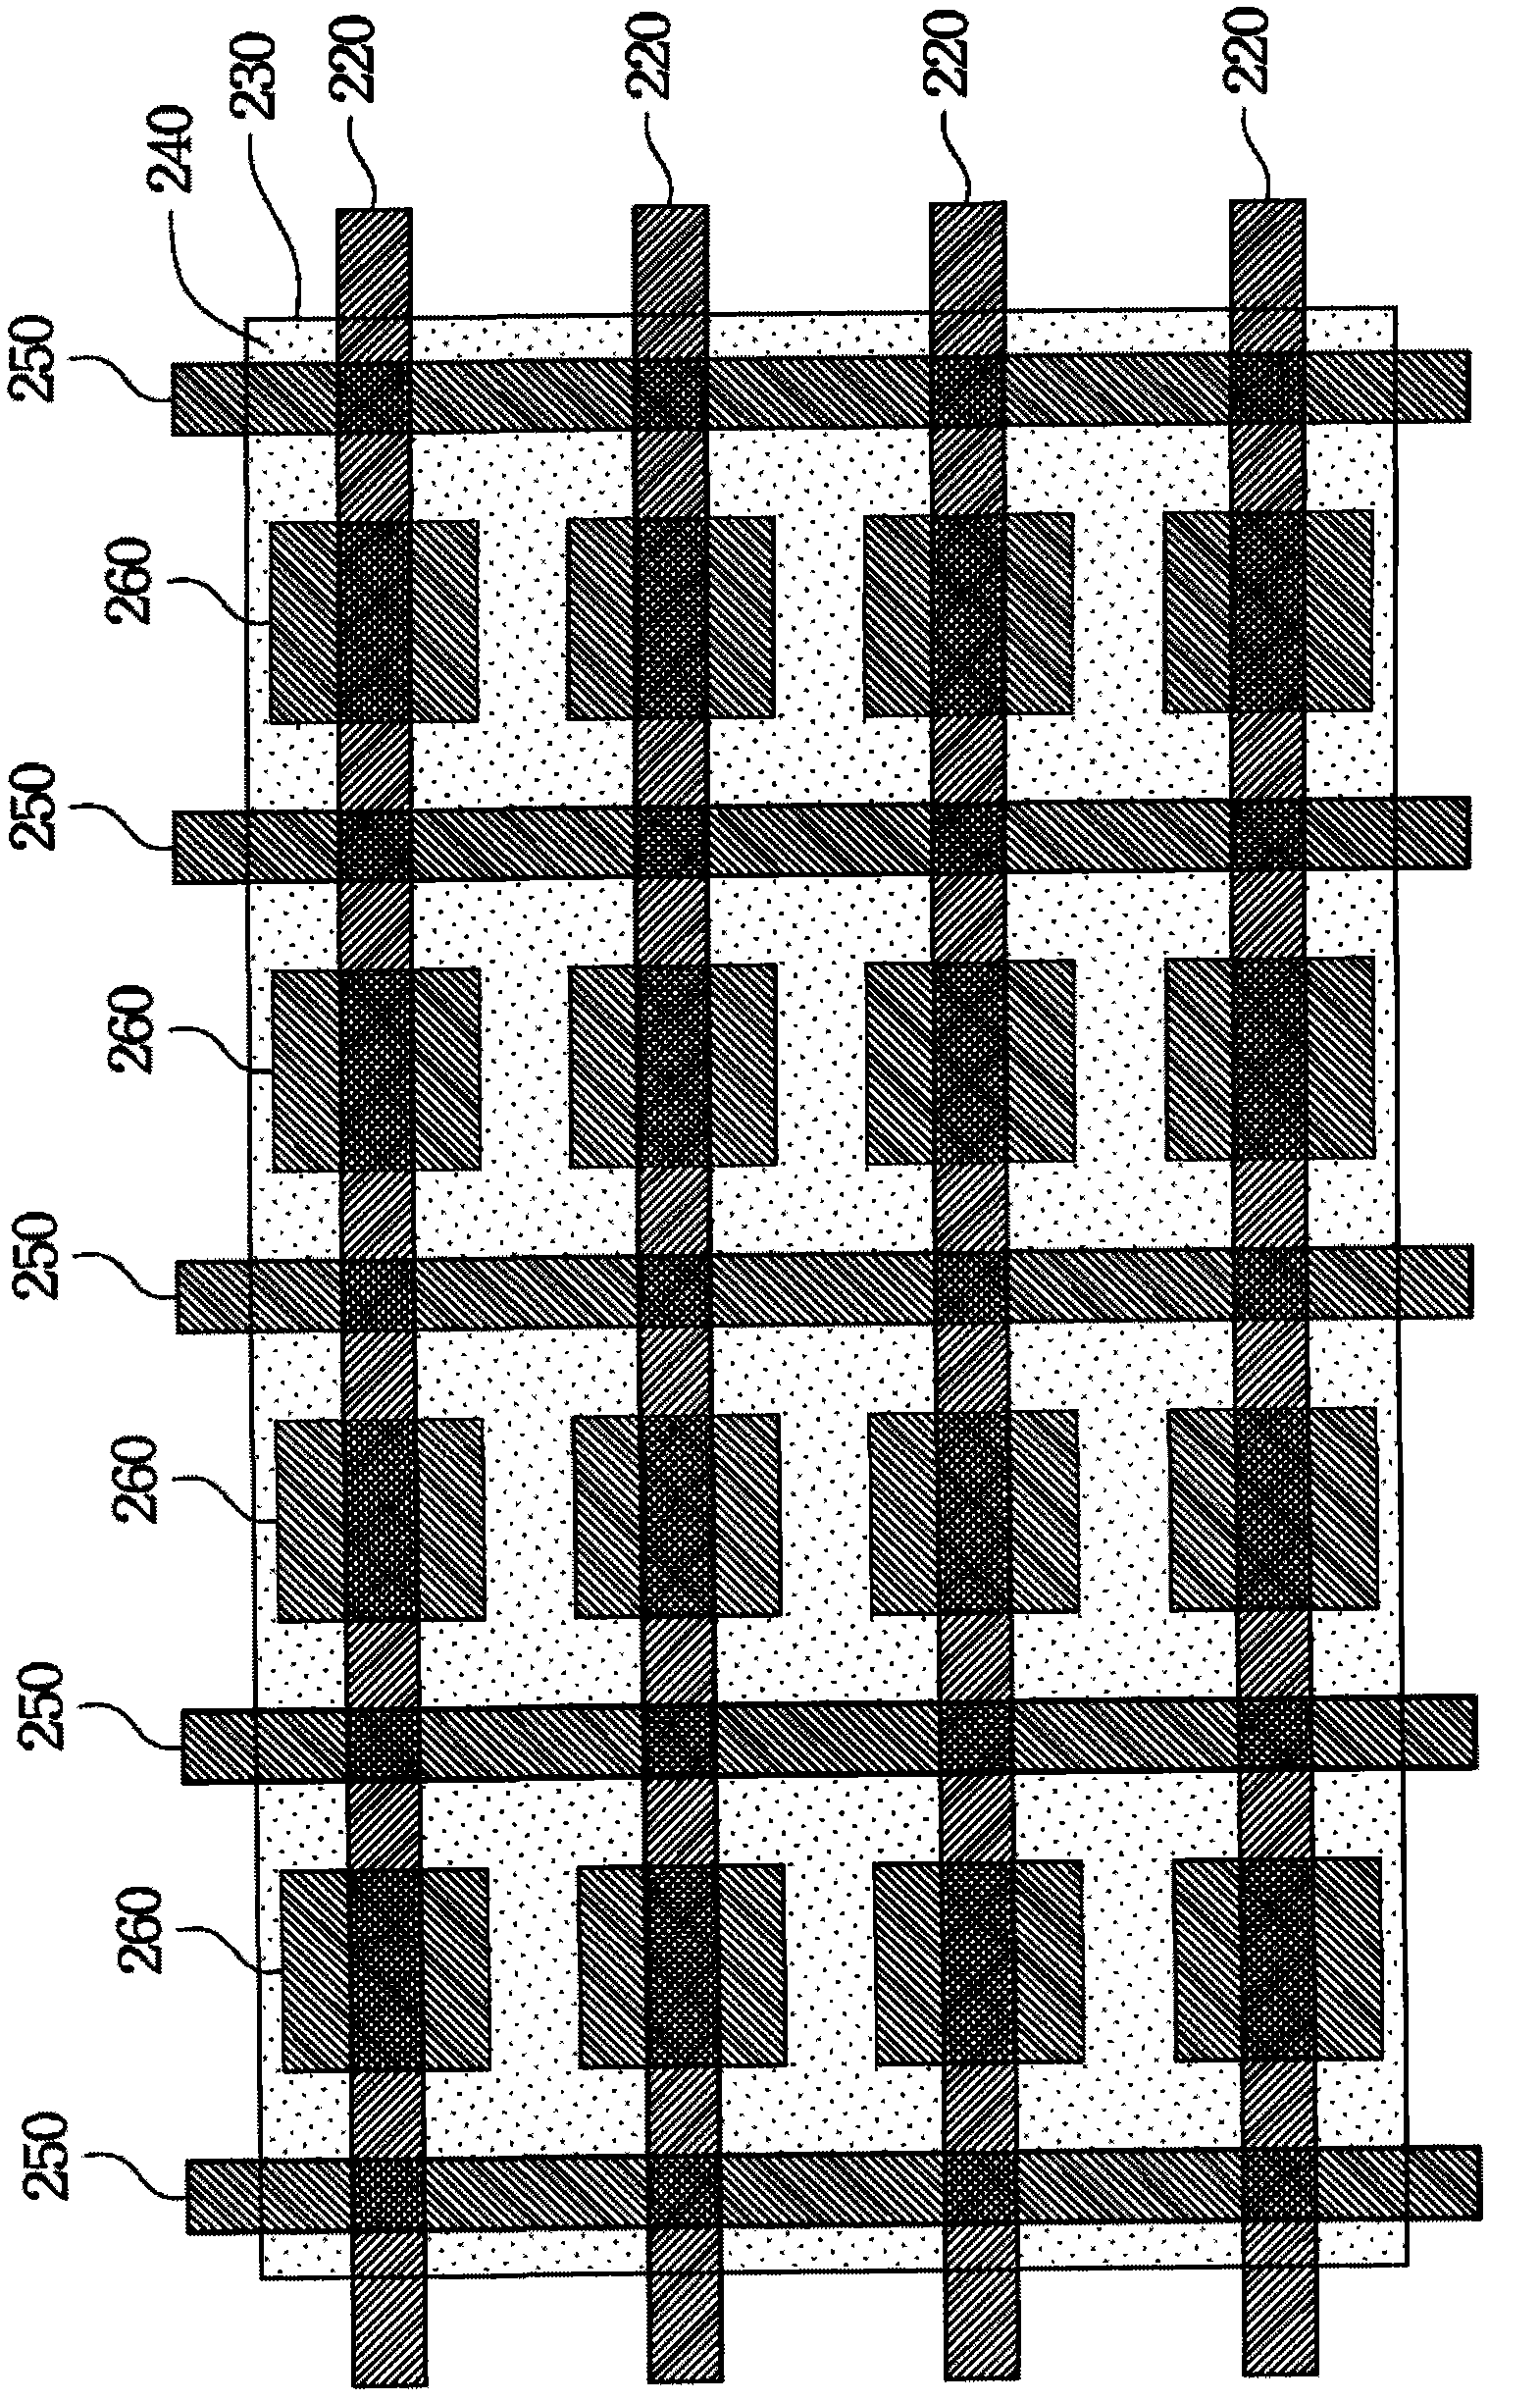 2D/3D convertible stereoscopic display and control electrode substrate thereof